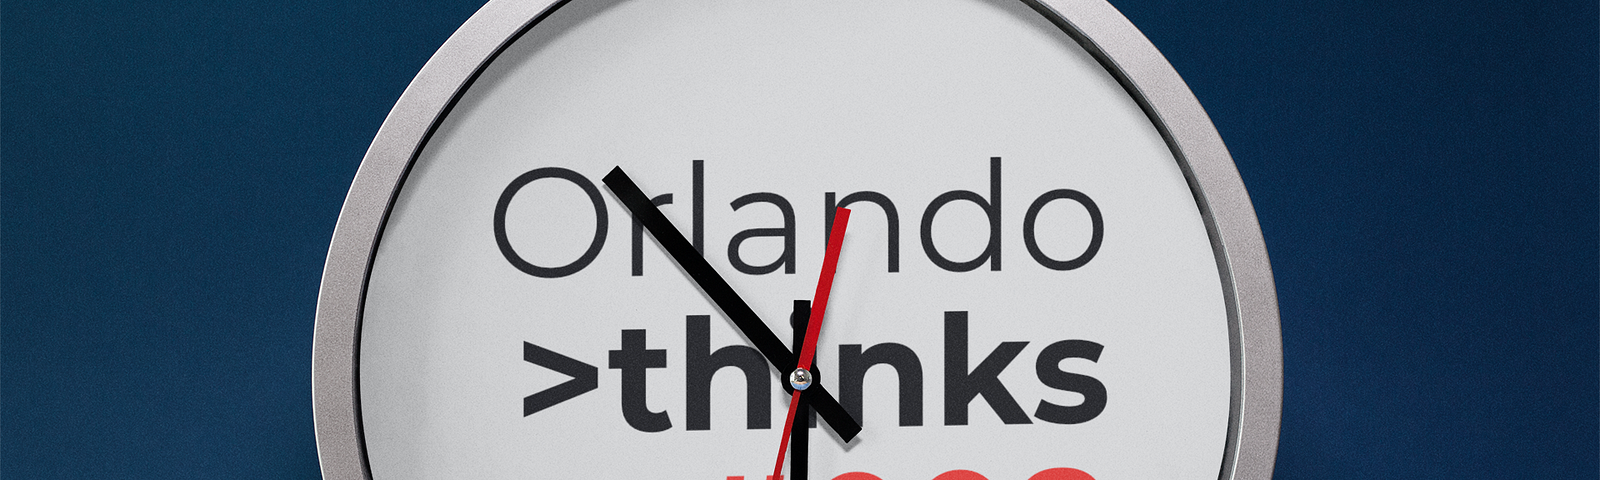 A clock showing the time 10:30. The background of the clock contains the words “Orlando thinks #008”